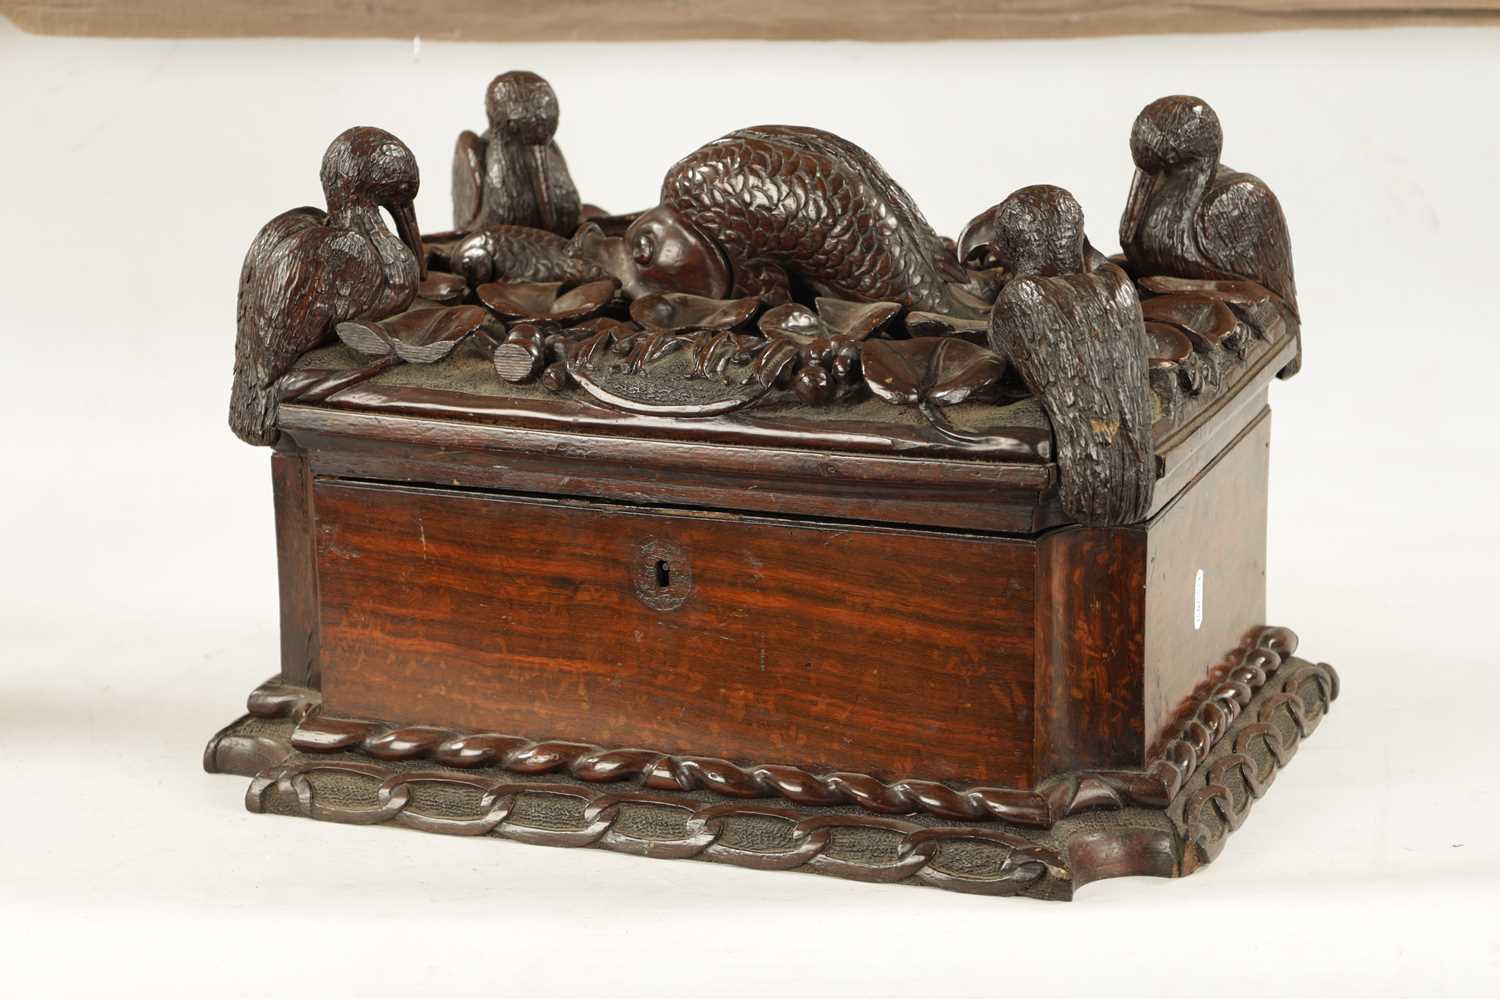 AN IMPRESSIVE 18TH CENTURY CONTINENTAL CARVED HARDWOOD TABLE CASKET - Image 4 of 6